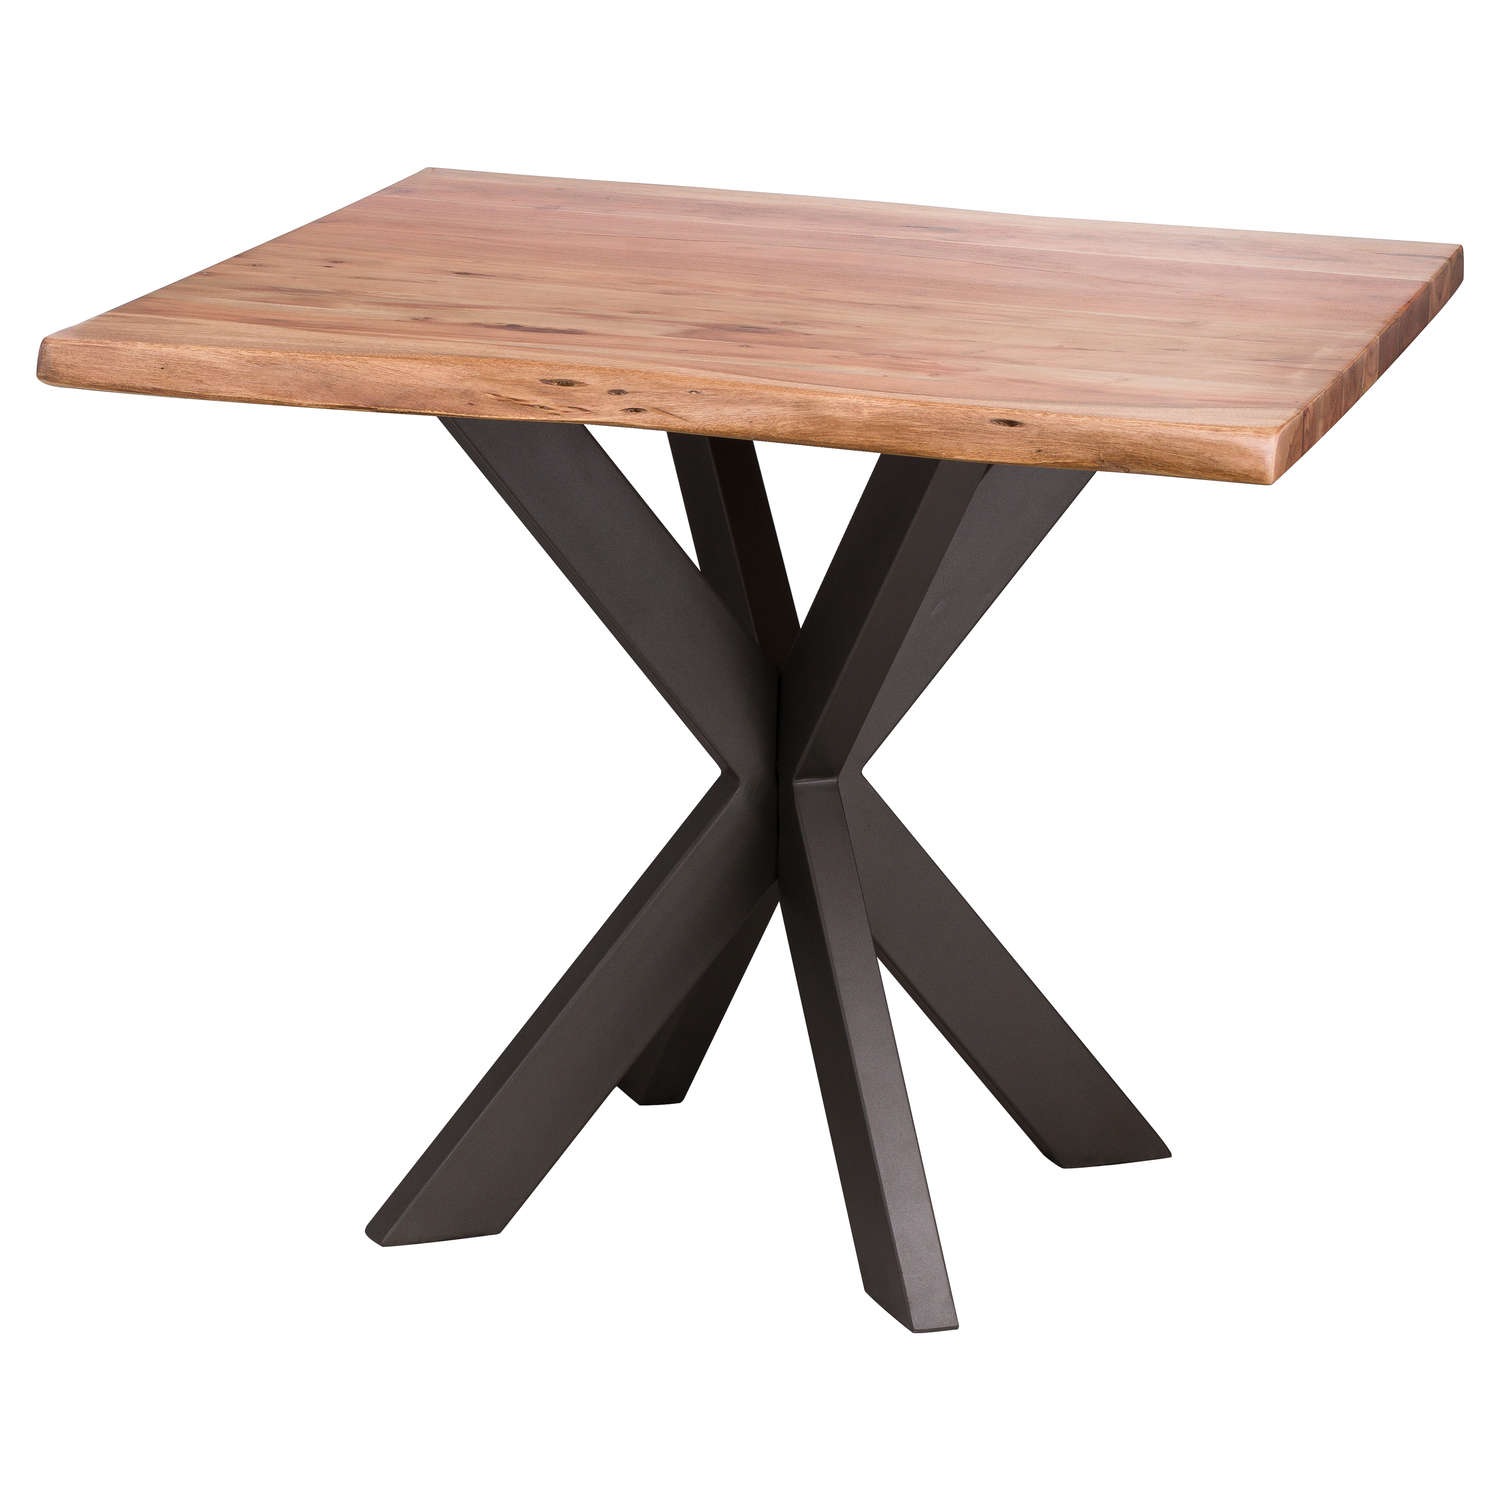 Live Edge Collection Square Dining Table - Image 1